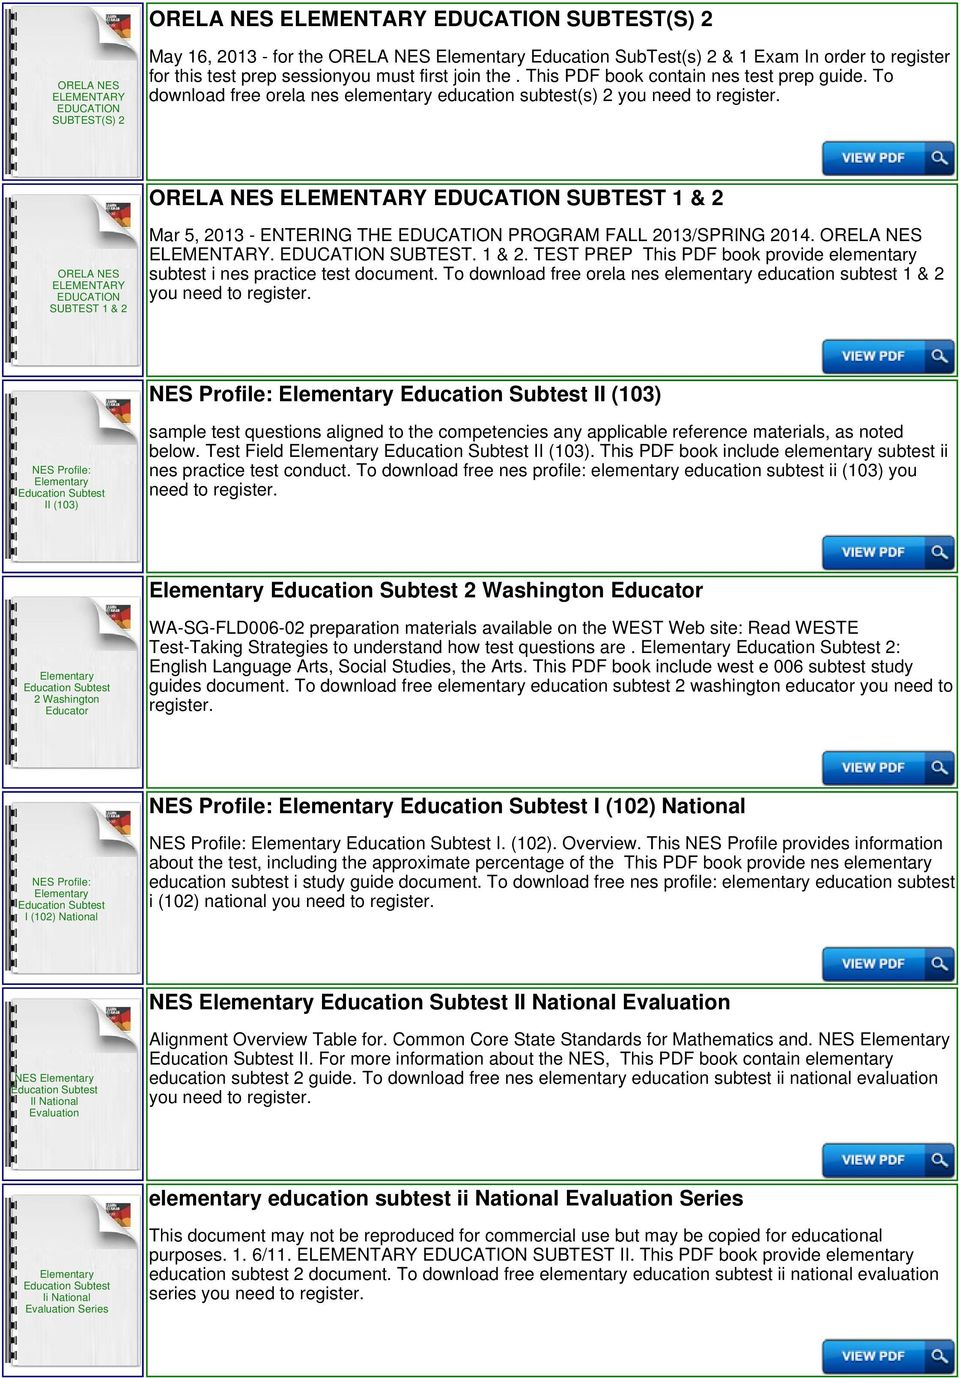 To download free orela nes elementary education subtest(s) 2 you need to ORELA NES ELEMENTARY EDUCATION SUBTEST 1 & 2 ORELA NES ELEMENTARY EDUCATION SUBTEST 1 & 2 Mar 5, 2013 - ENTERING THE EDUCATION